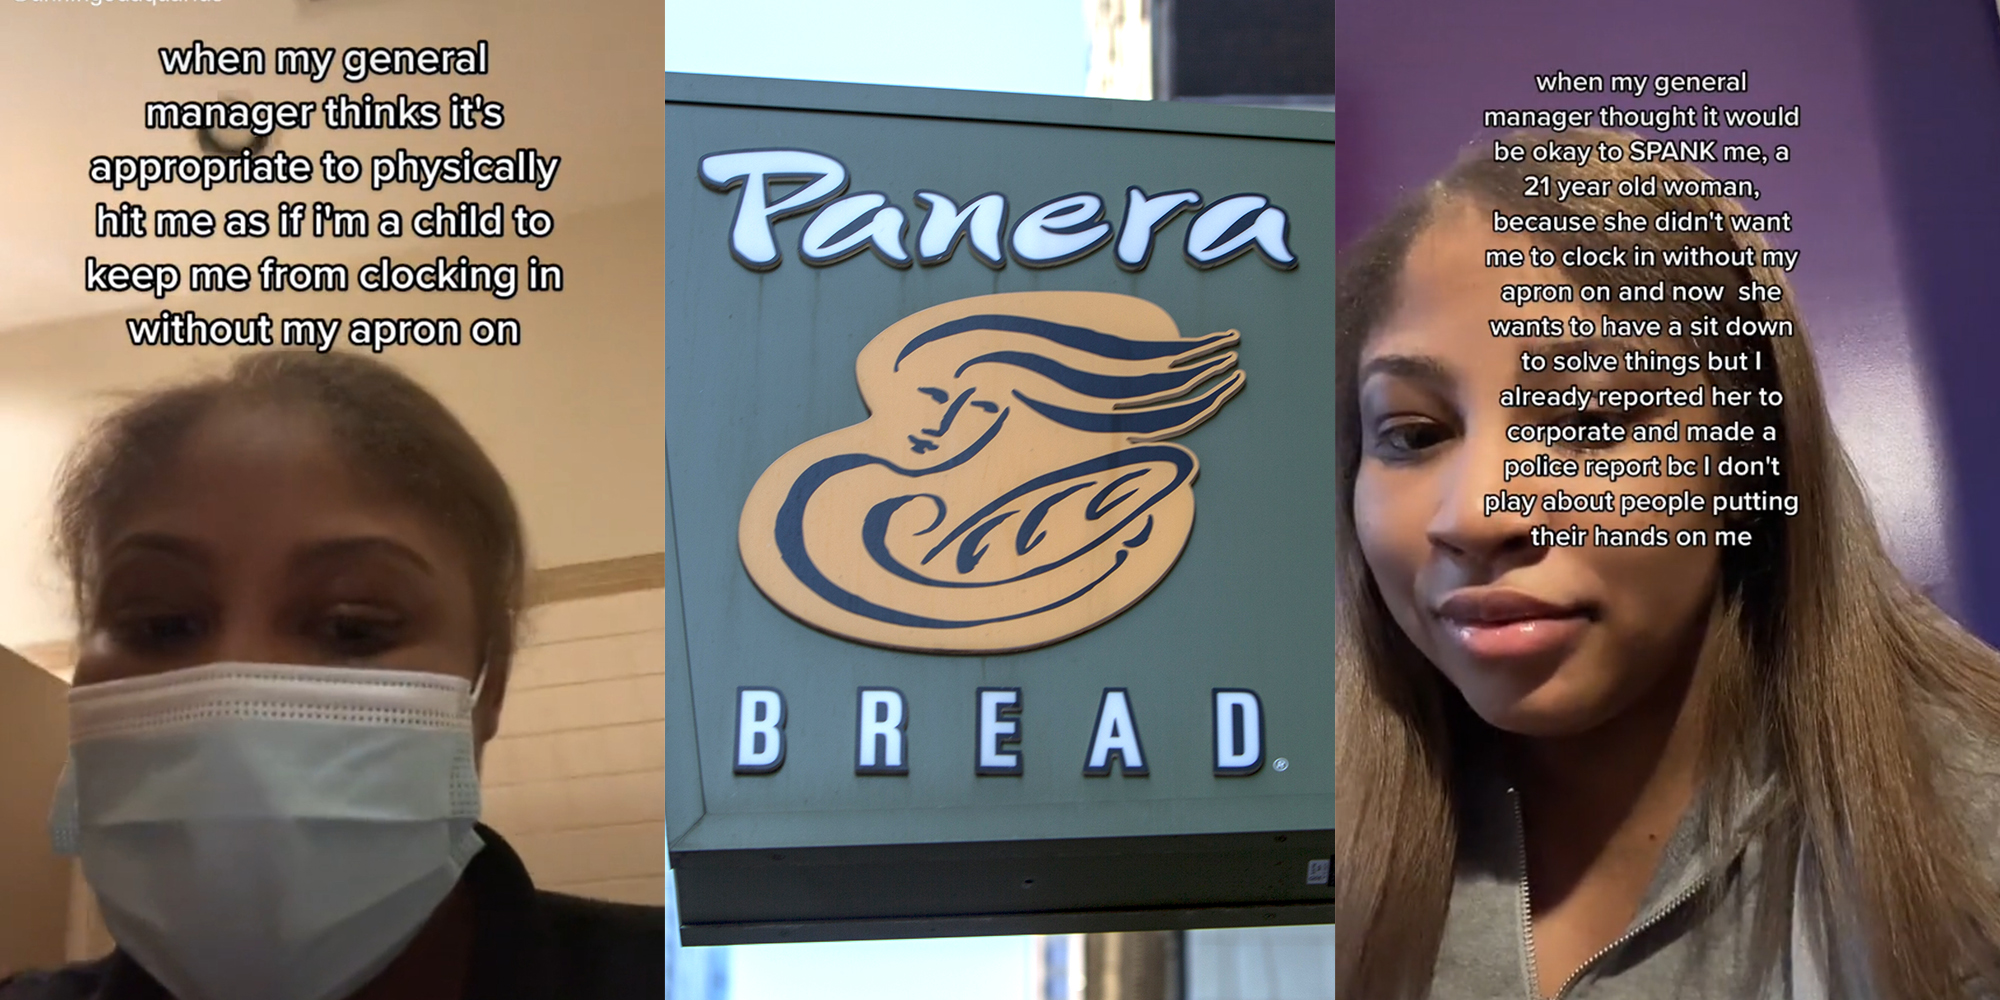 21-Year-Old Worker Says Her Manager at Panera Spanked pic